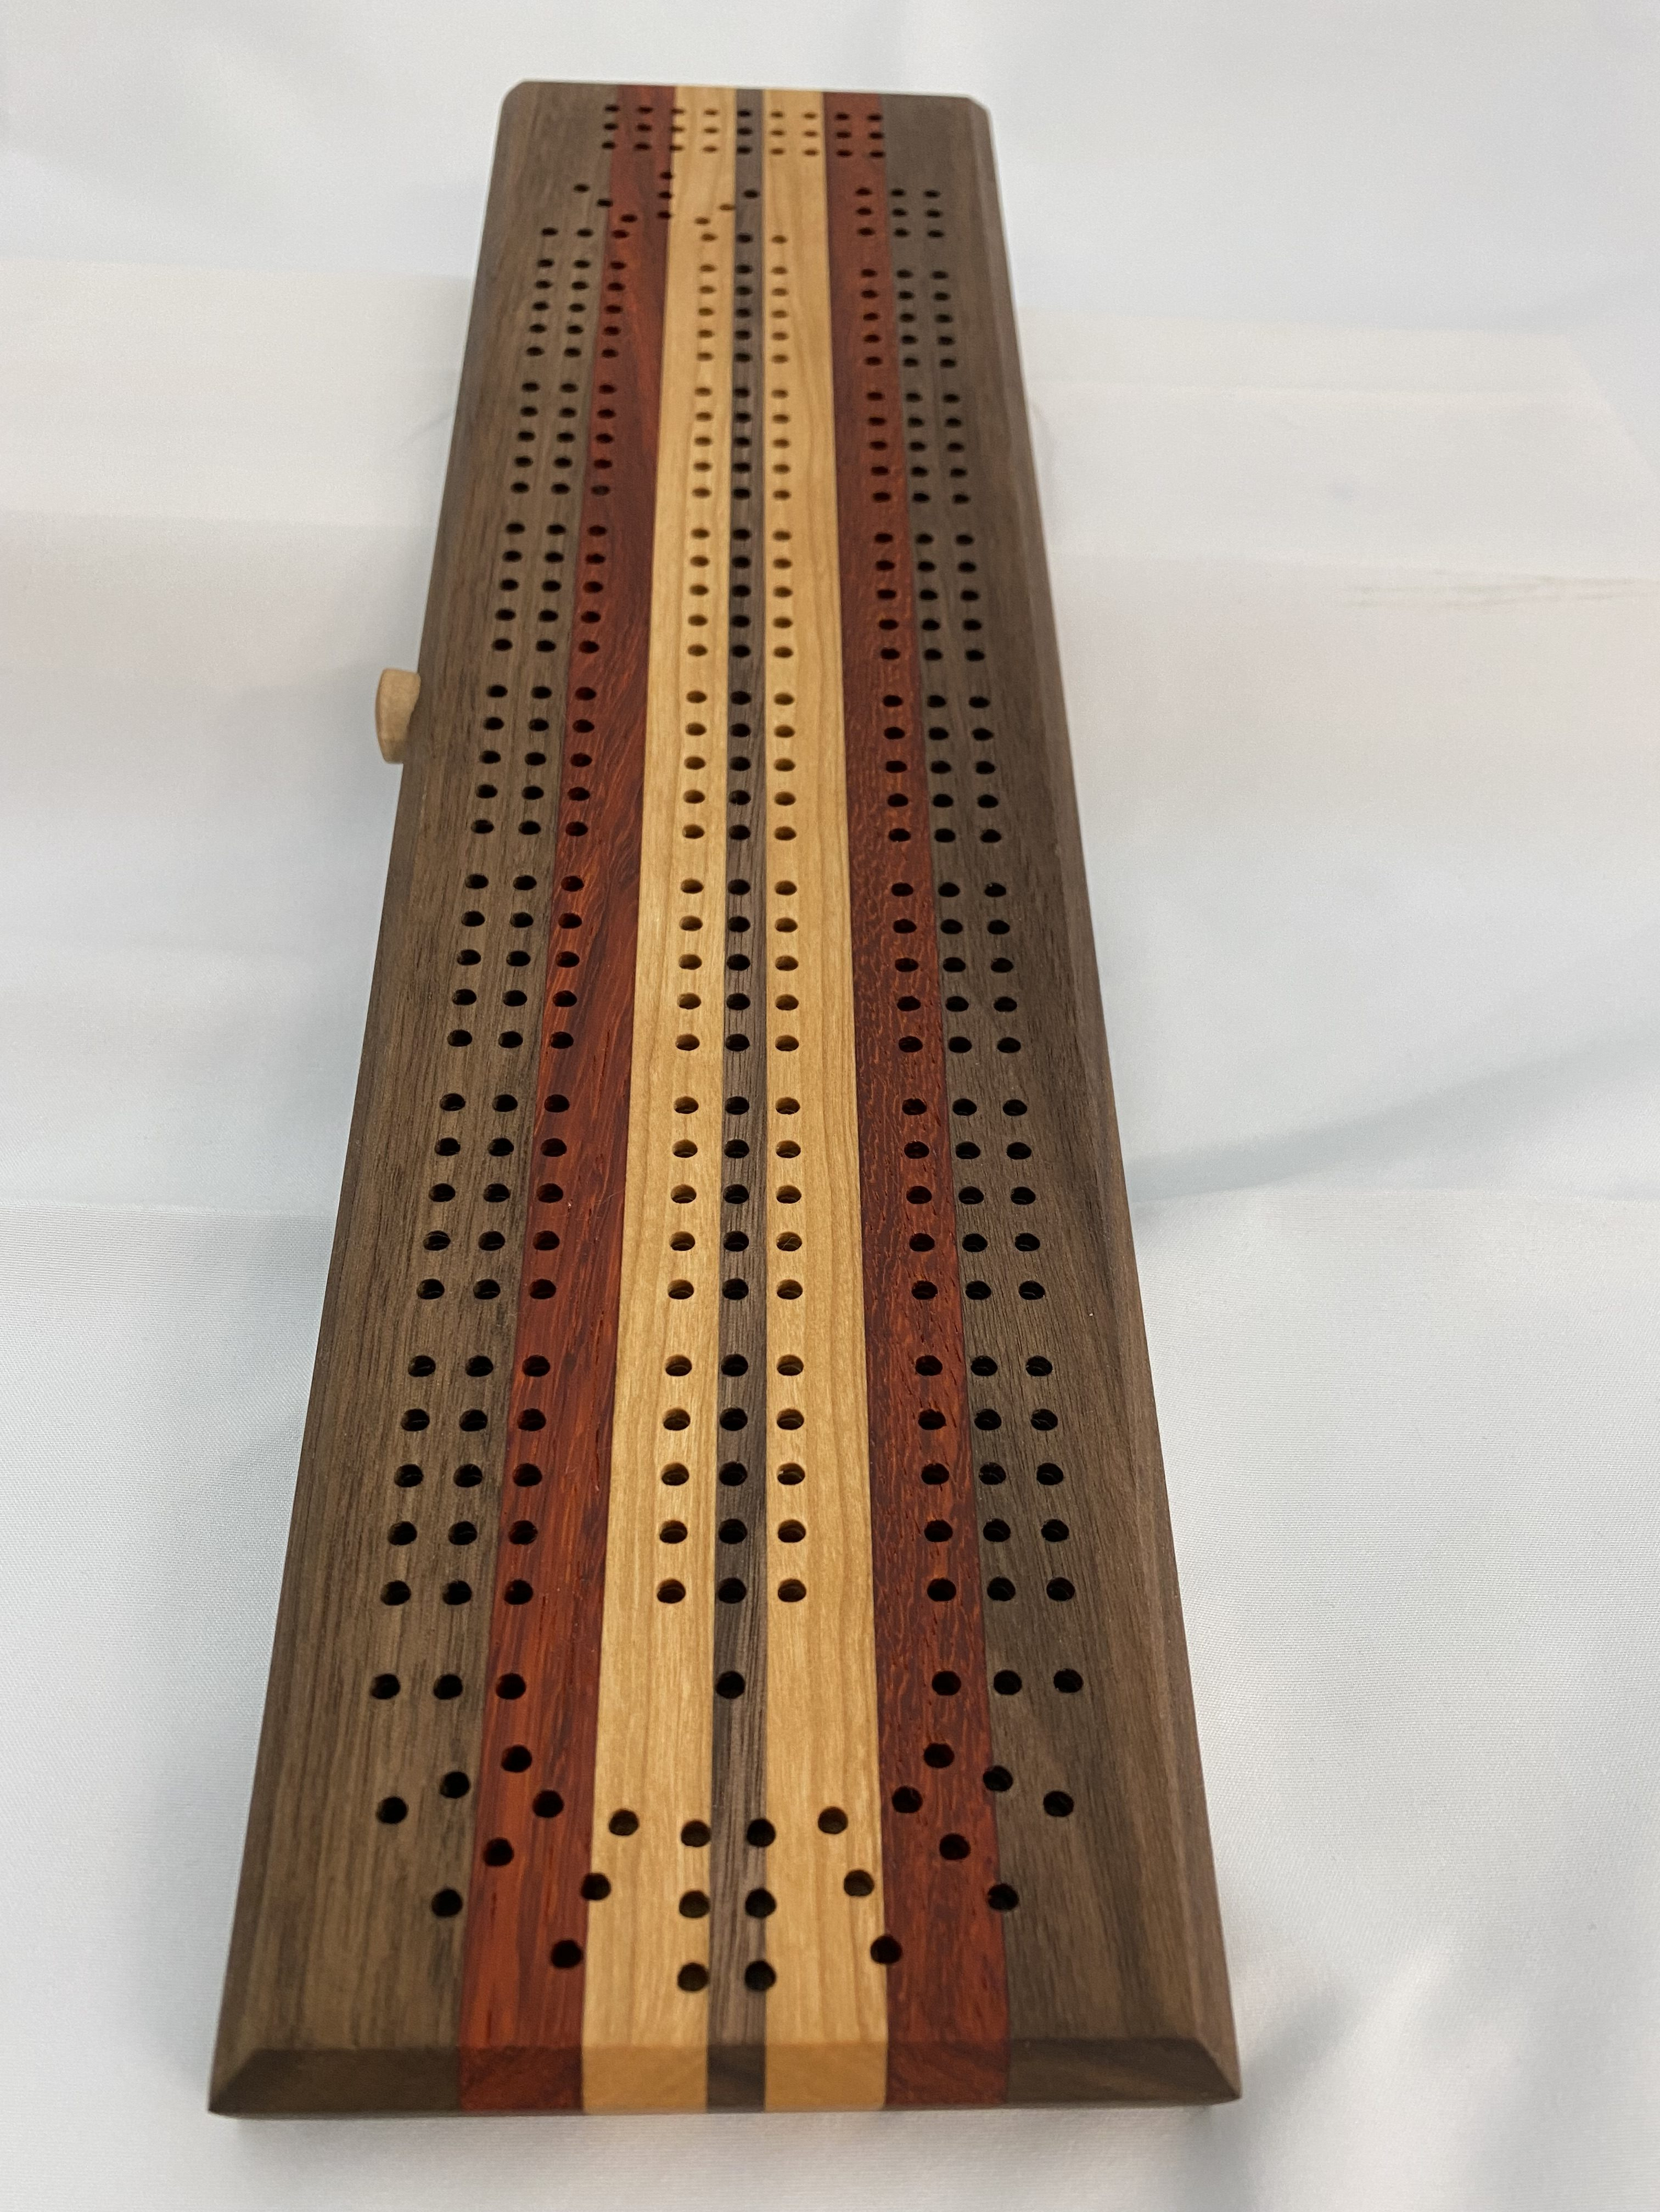 This cribbage board is made of Black walnut, padauk, and cherry.